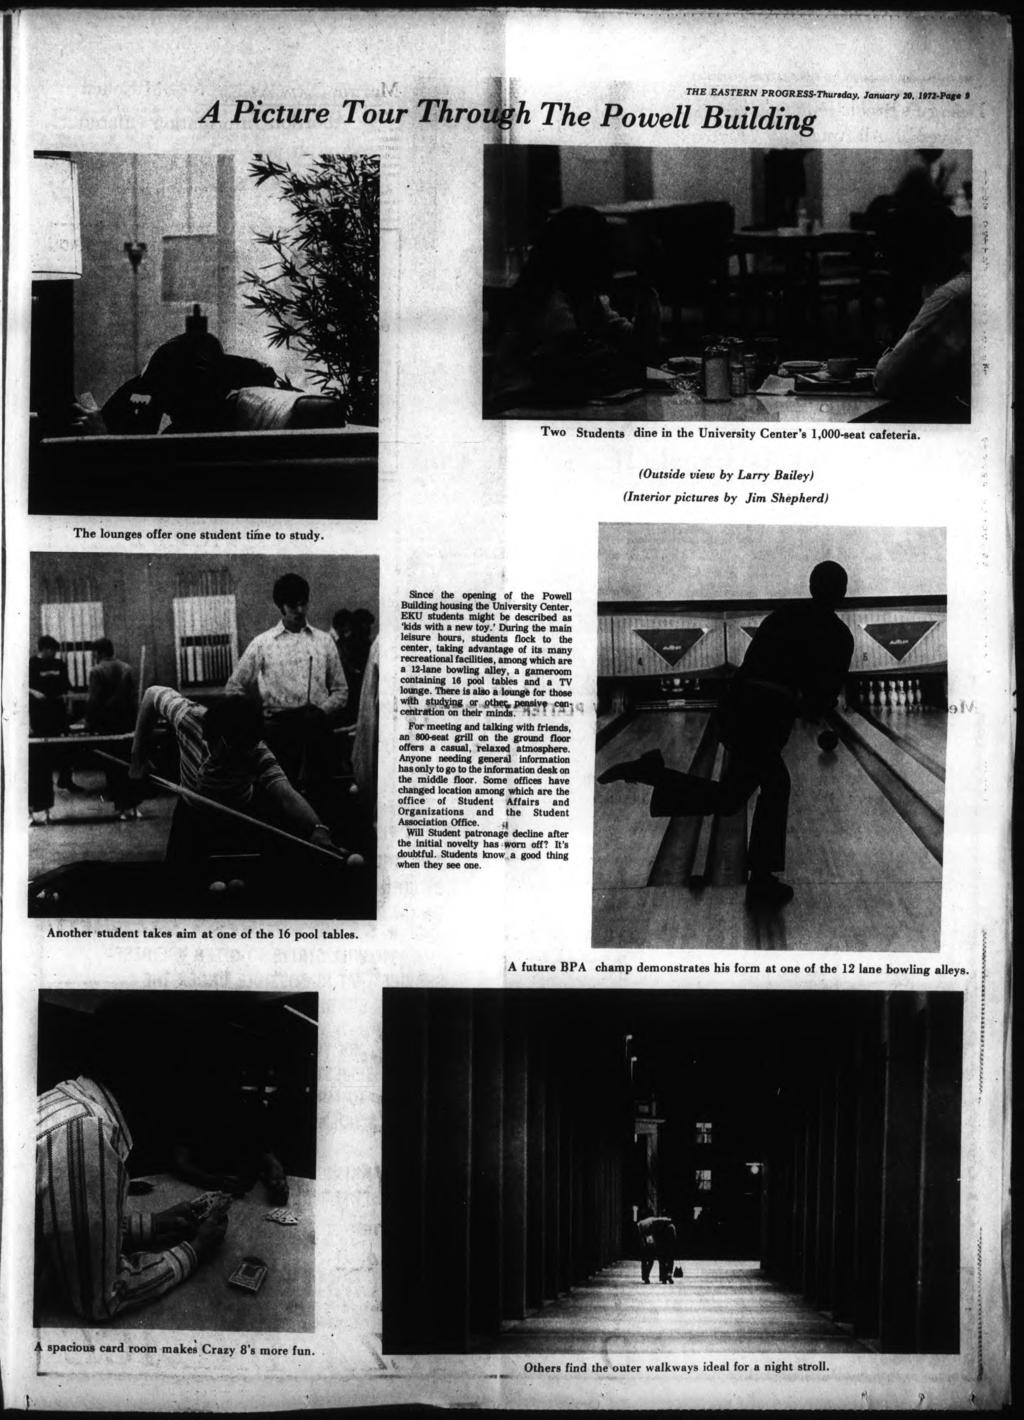 l r A Pcture Tour Through The Powell Buldng THE EASTERN PROGRESS-Thur$aay, January 20, 1972-Paga f Two Students dne n the Unversty Center's 1,000-seat cafetera.